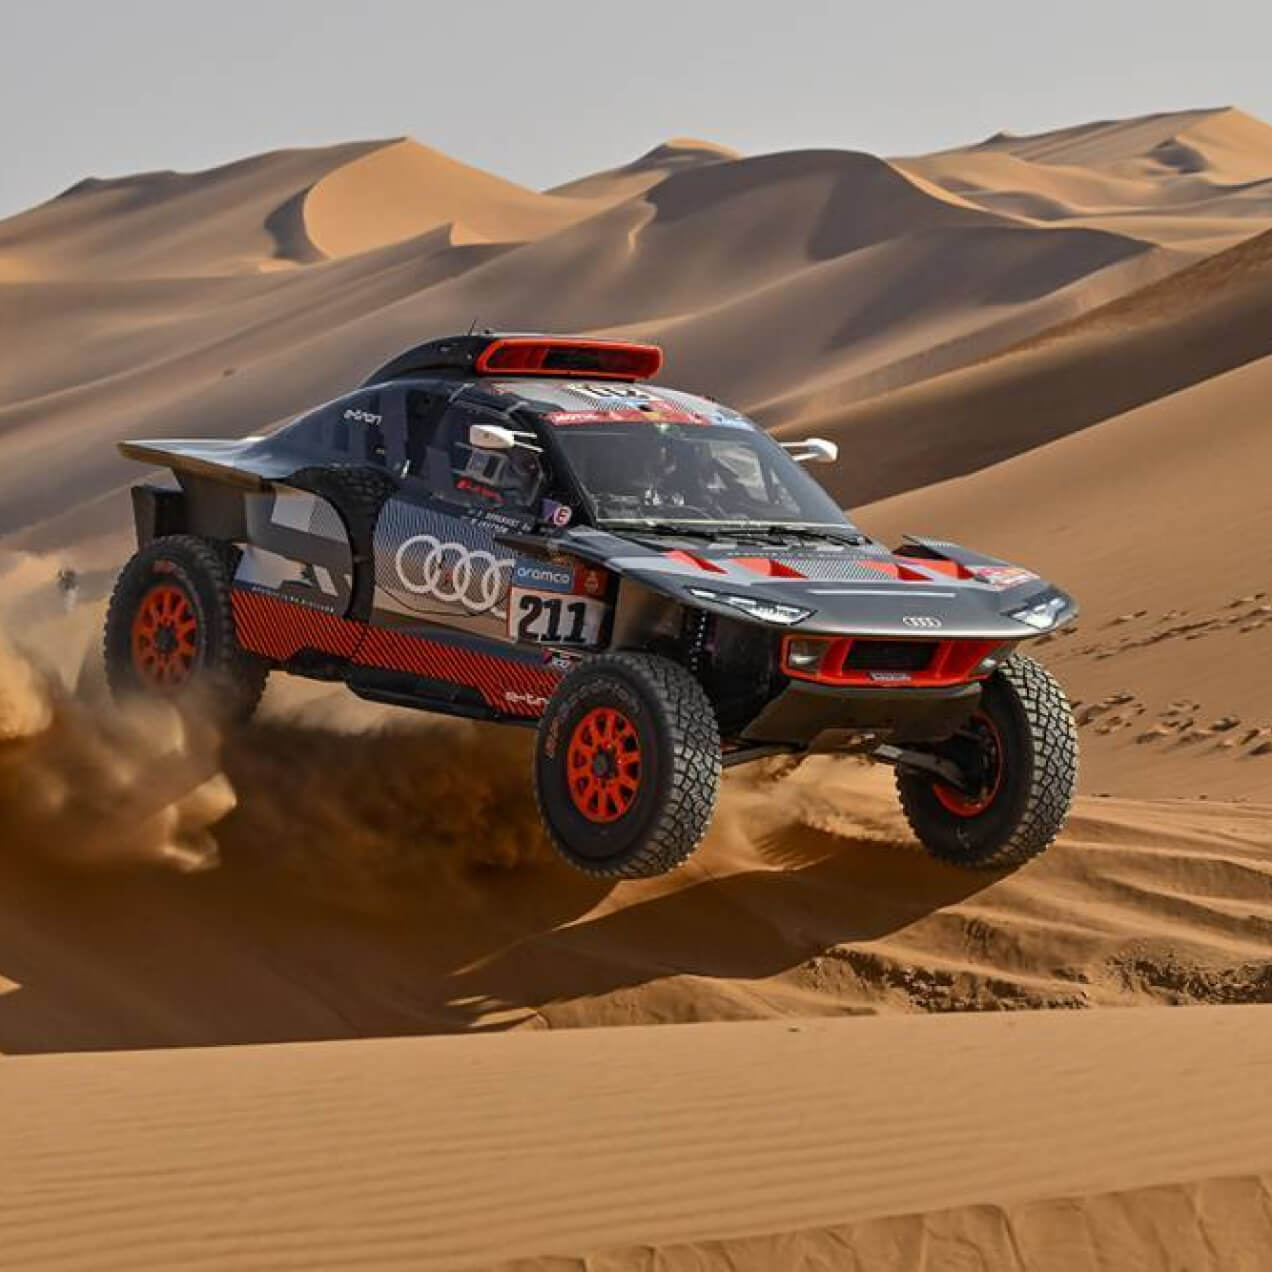 Electric mobility with Audi at the Dakar Rally